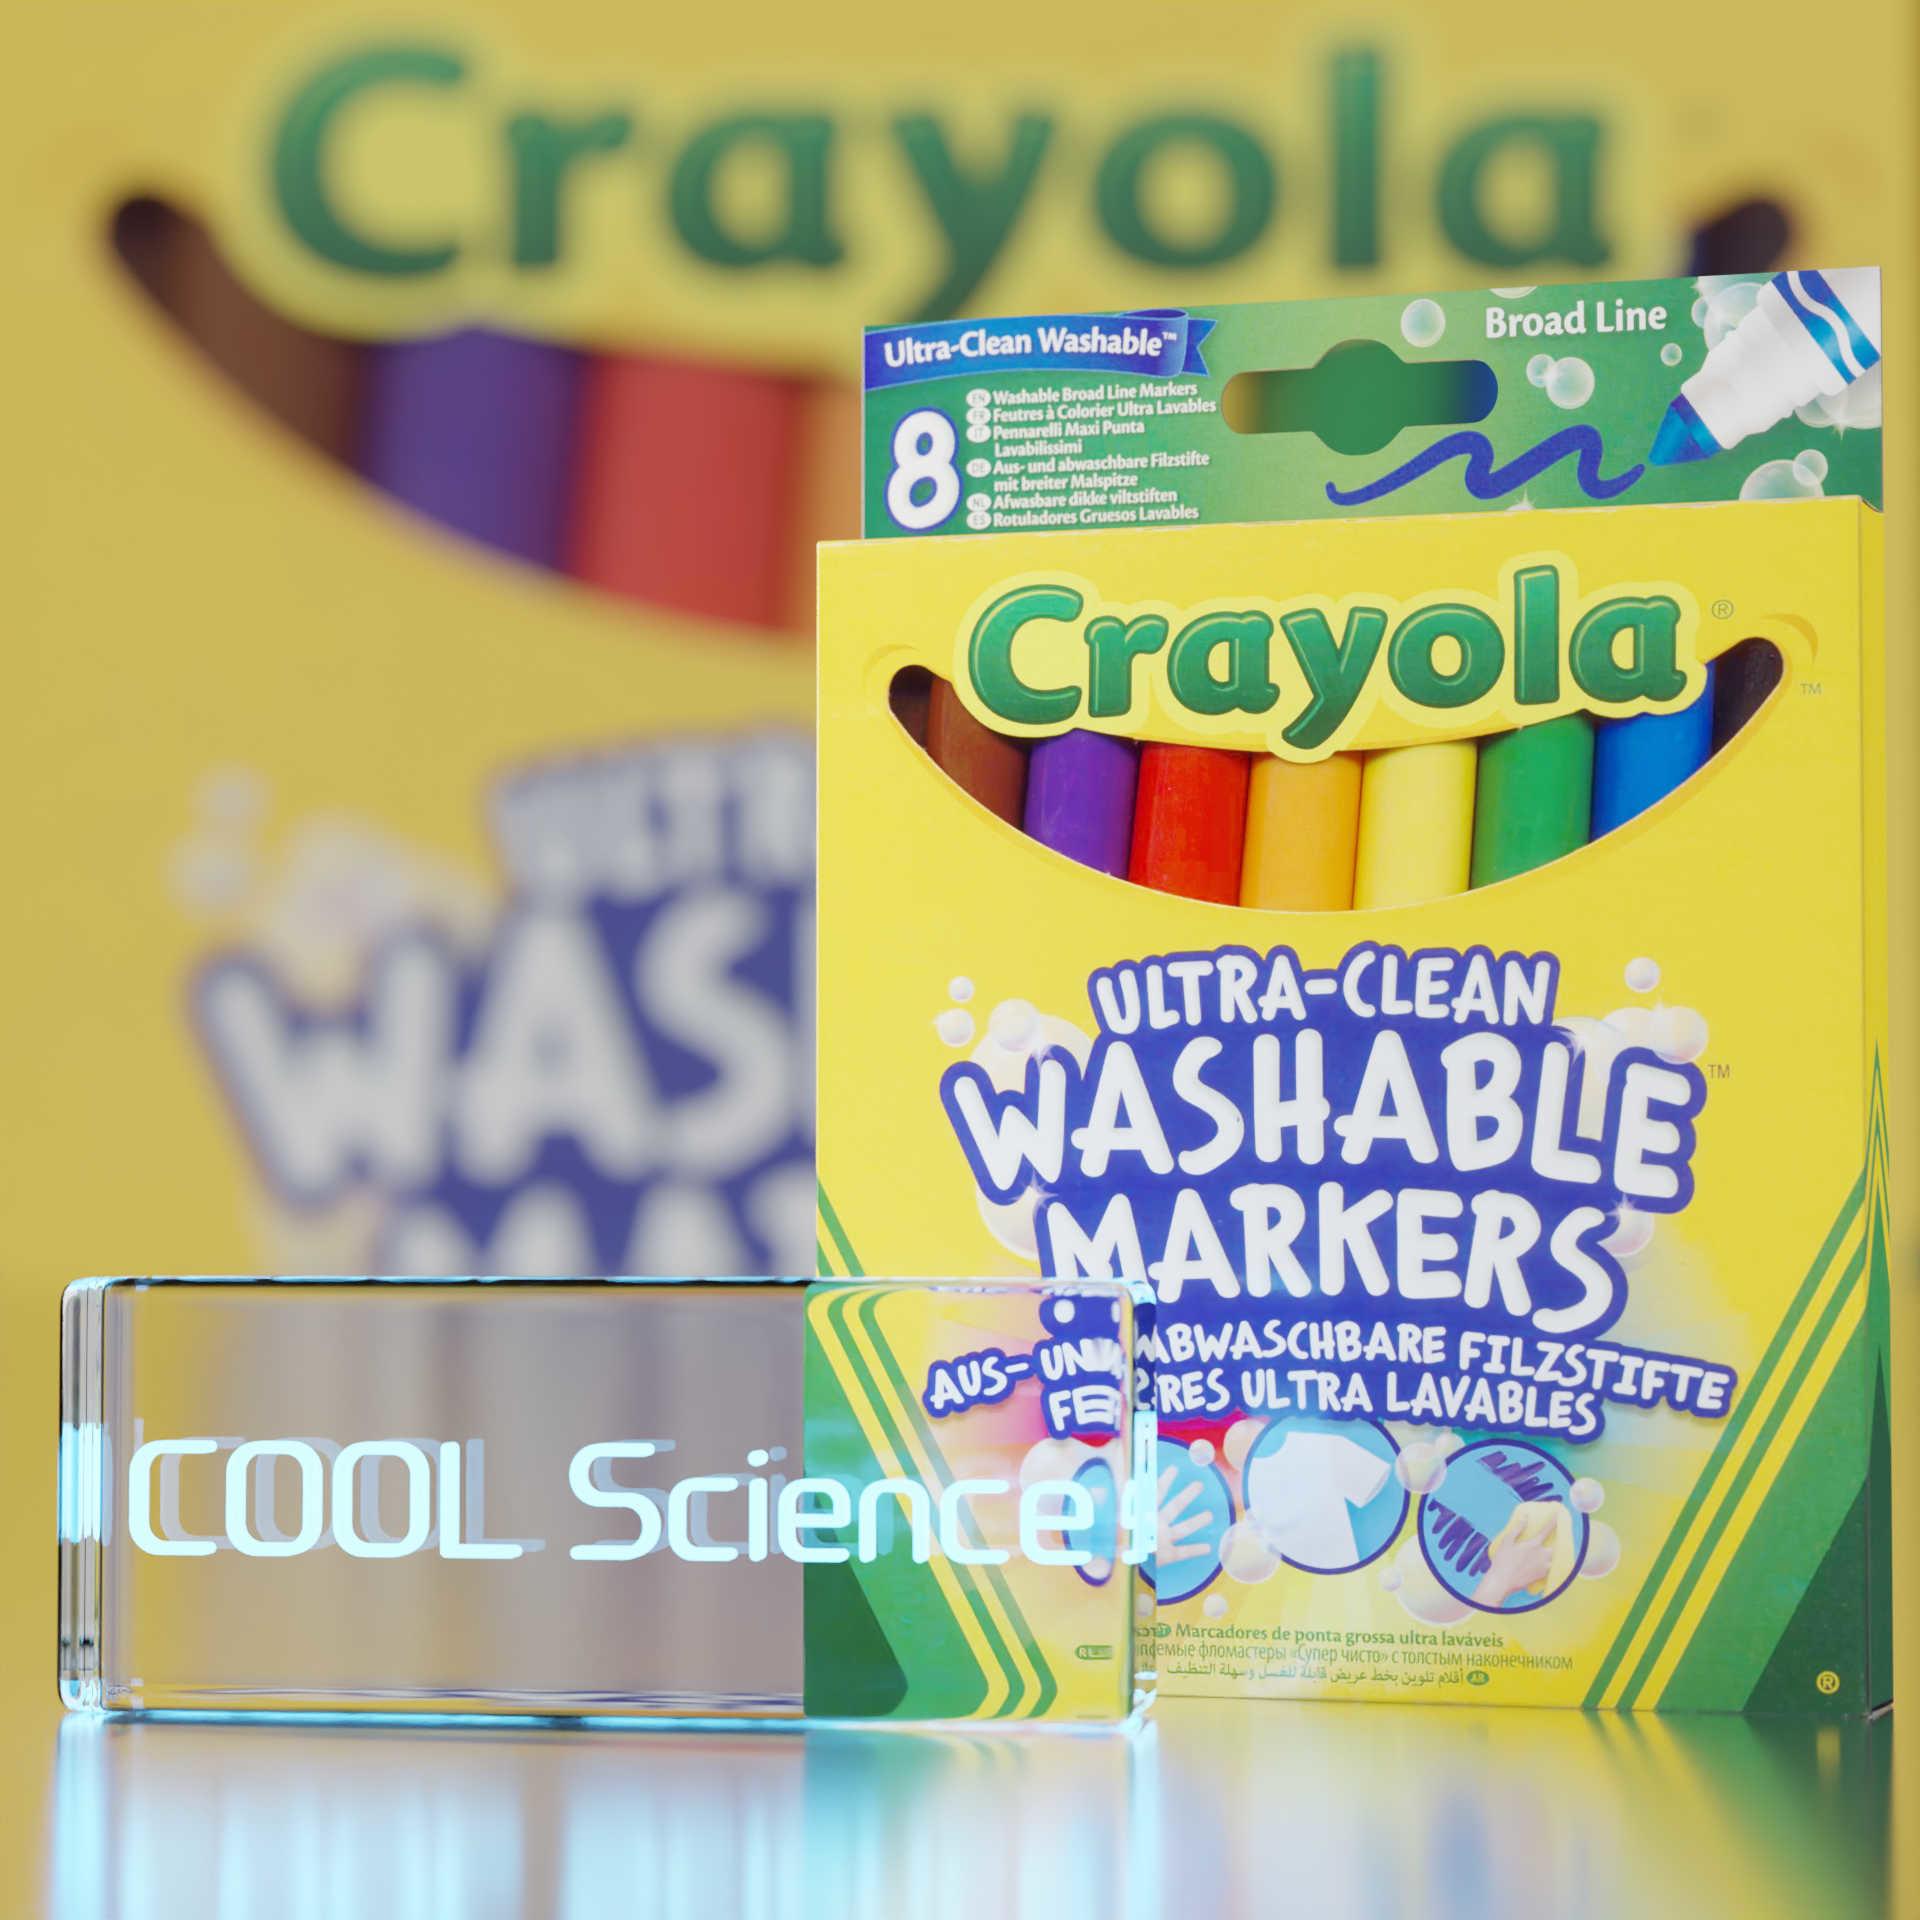 Front View of the Crayola 8 Ultra Clean Washable Broad Line Markers box